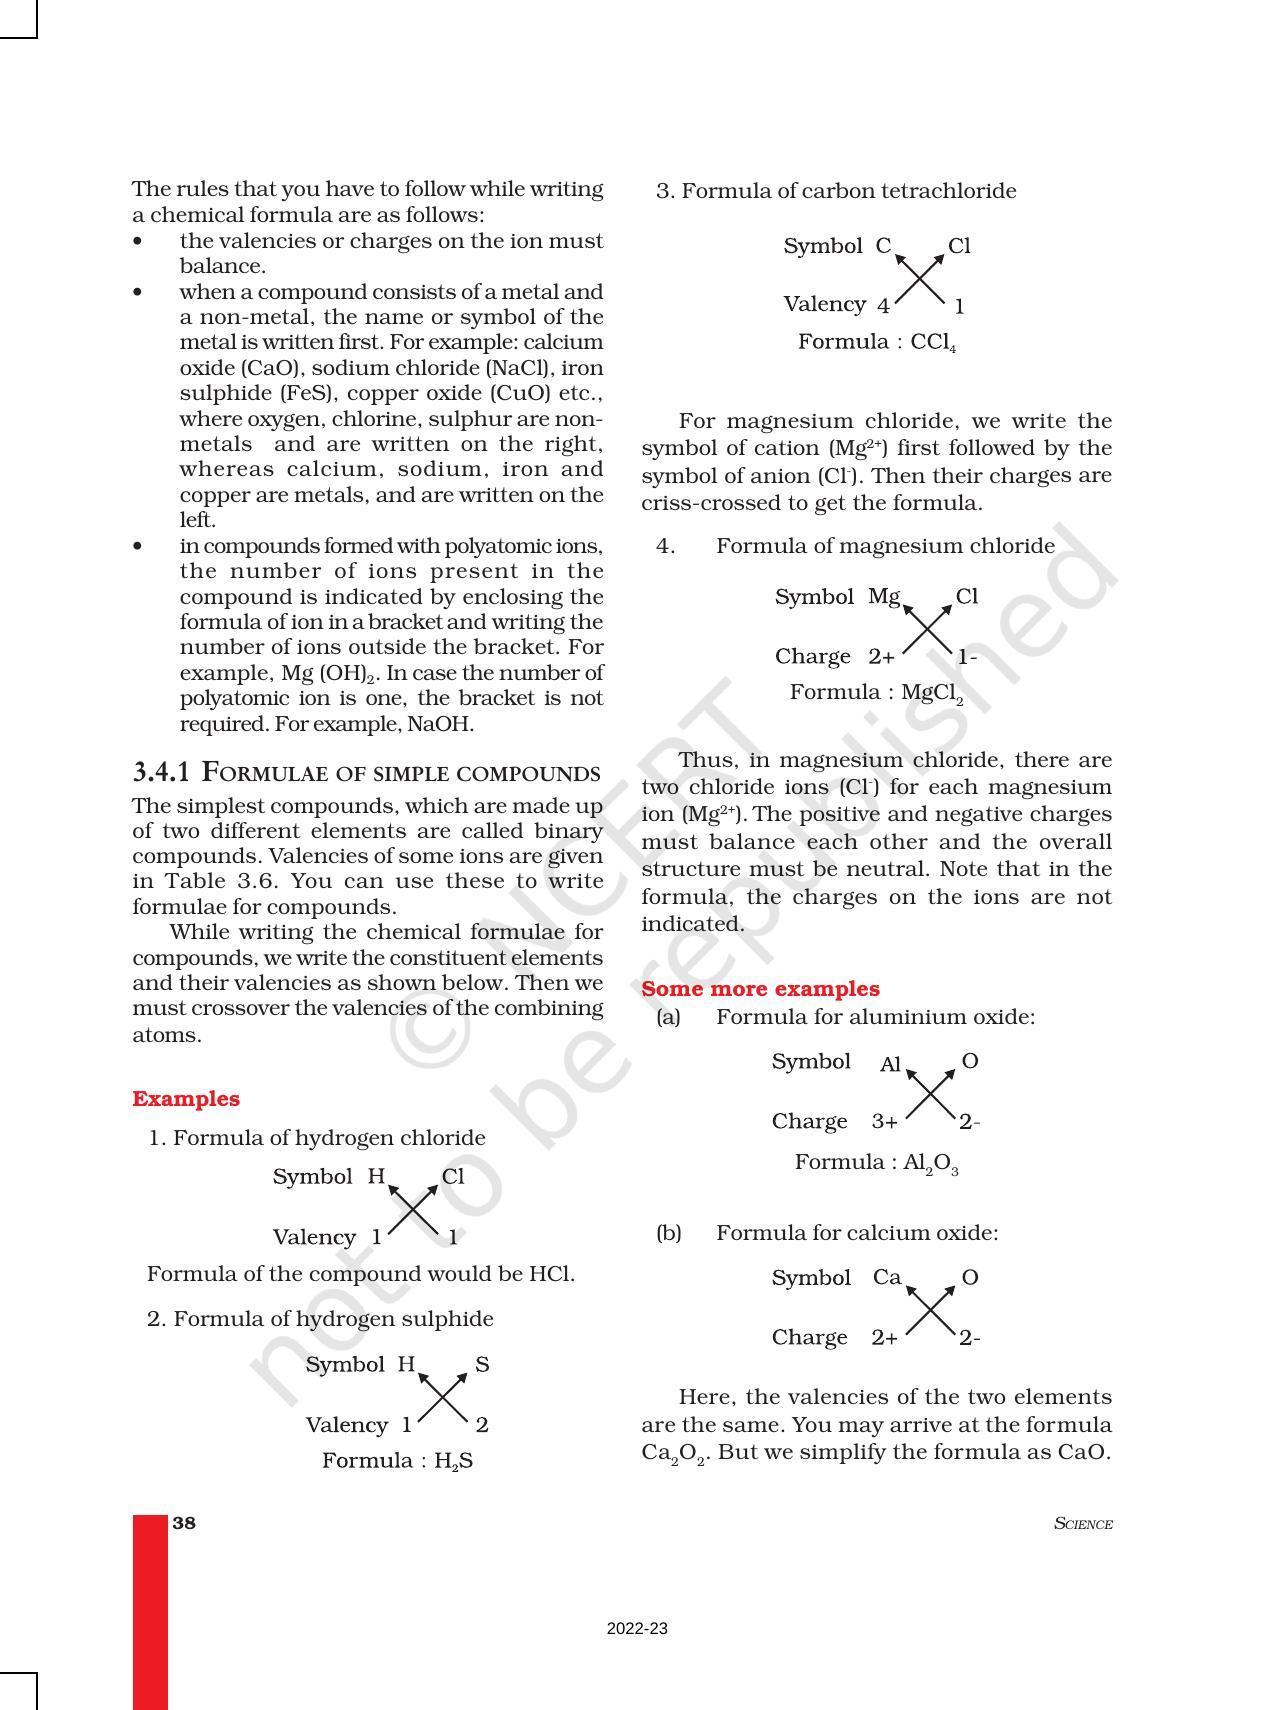 NCERT Book for Class 9 Science Chapter 3 Atoms And Molecules - Page 8